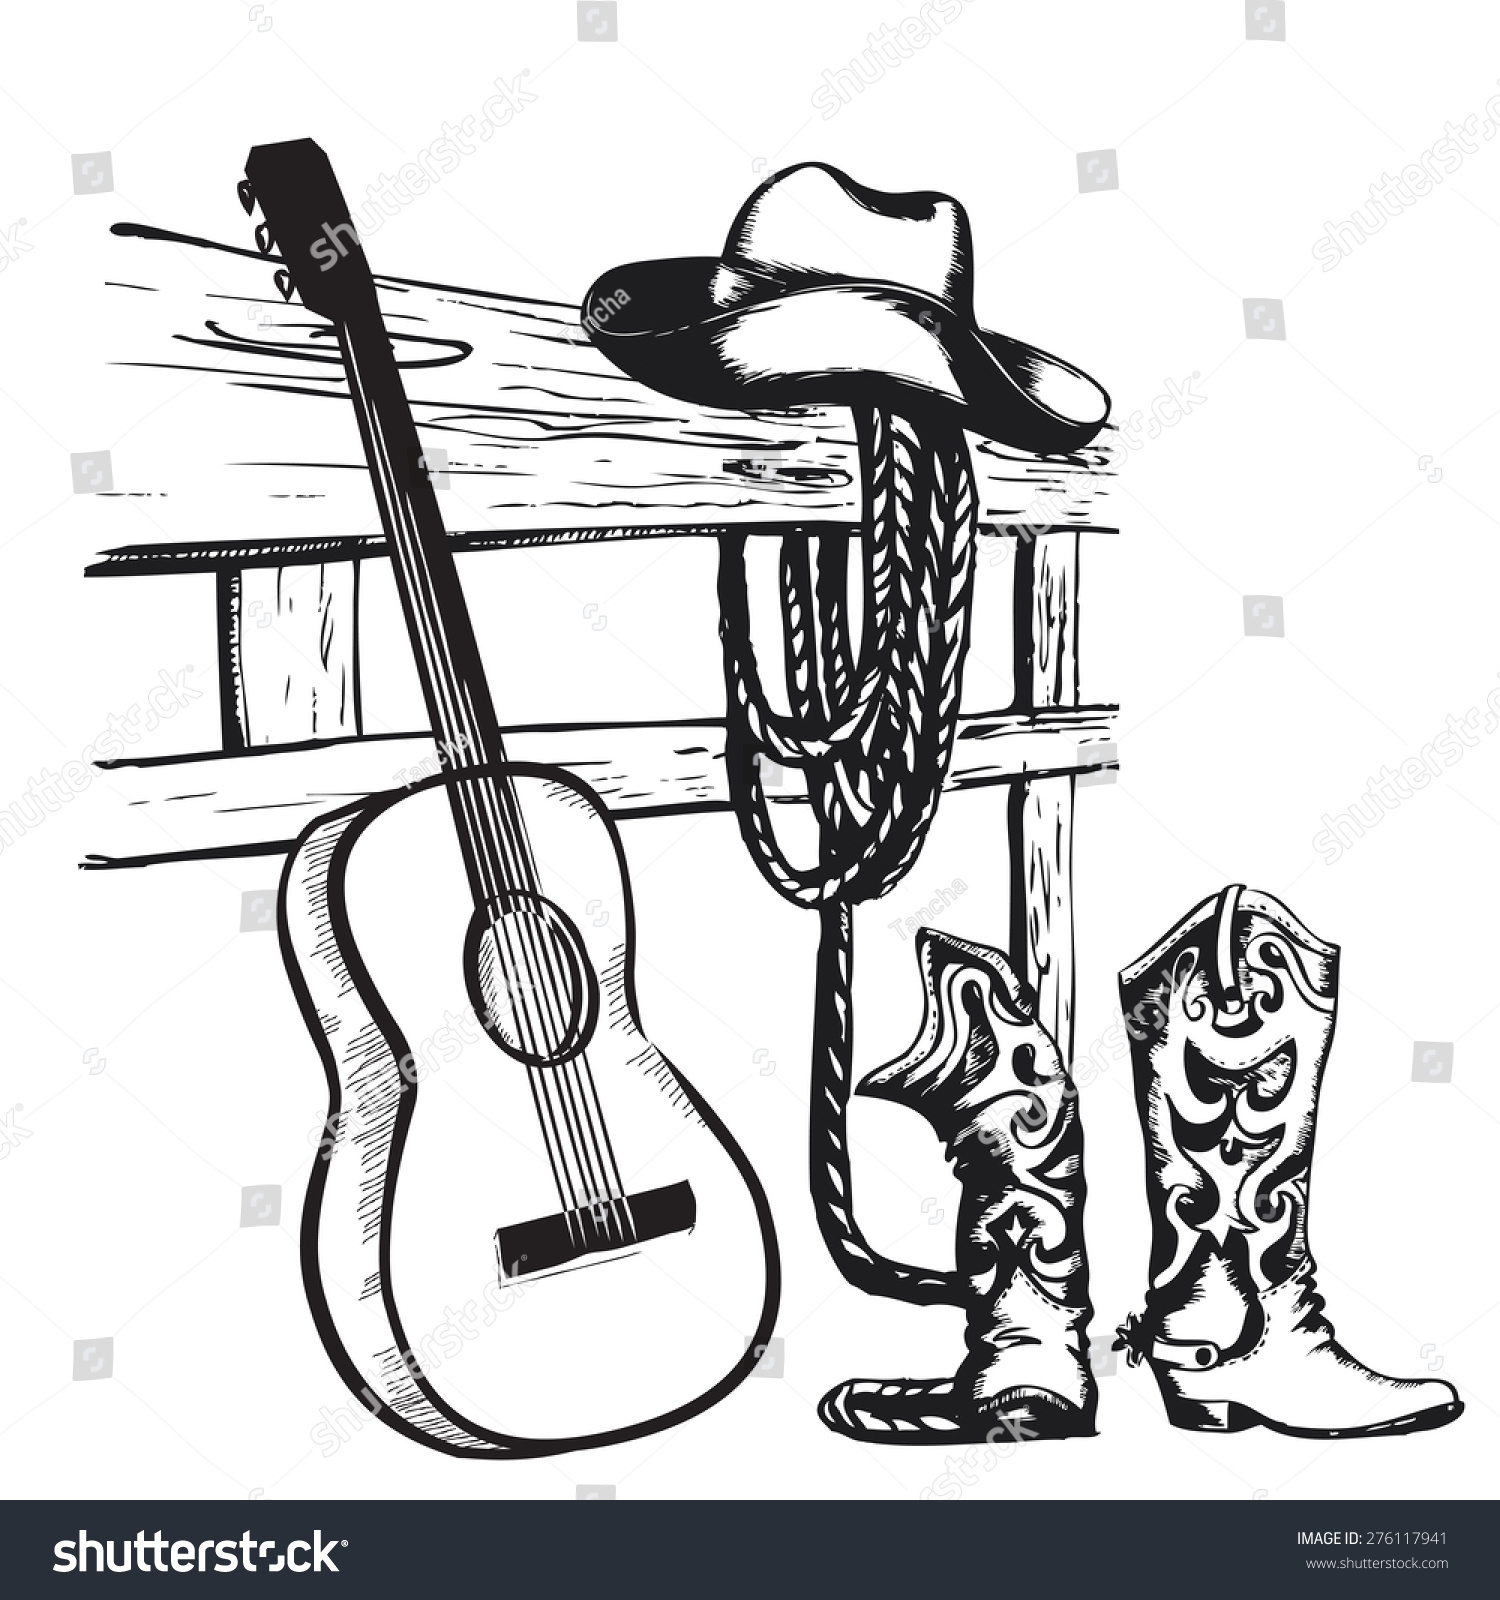 country music clipart graphics - photo #19